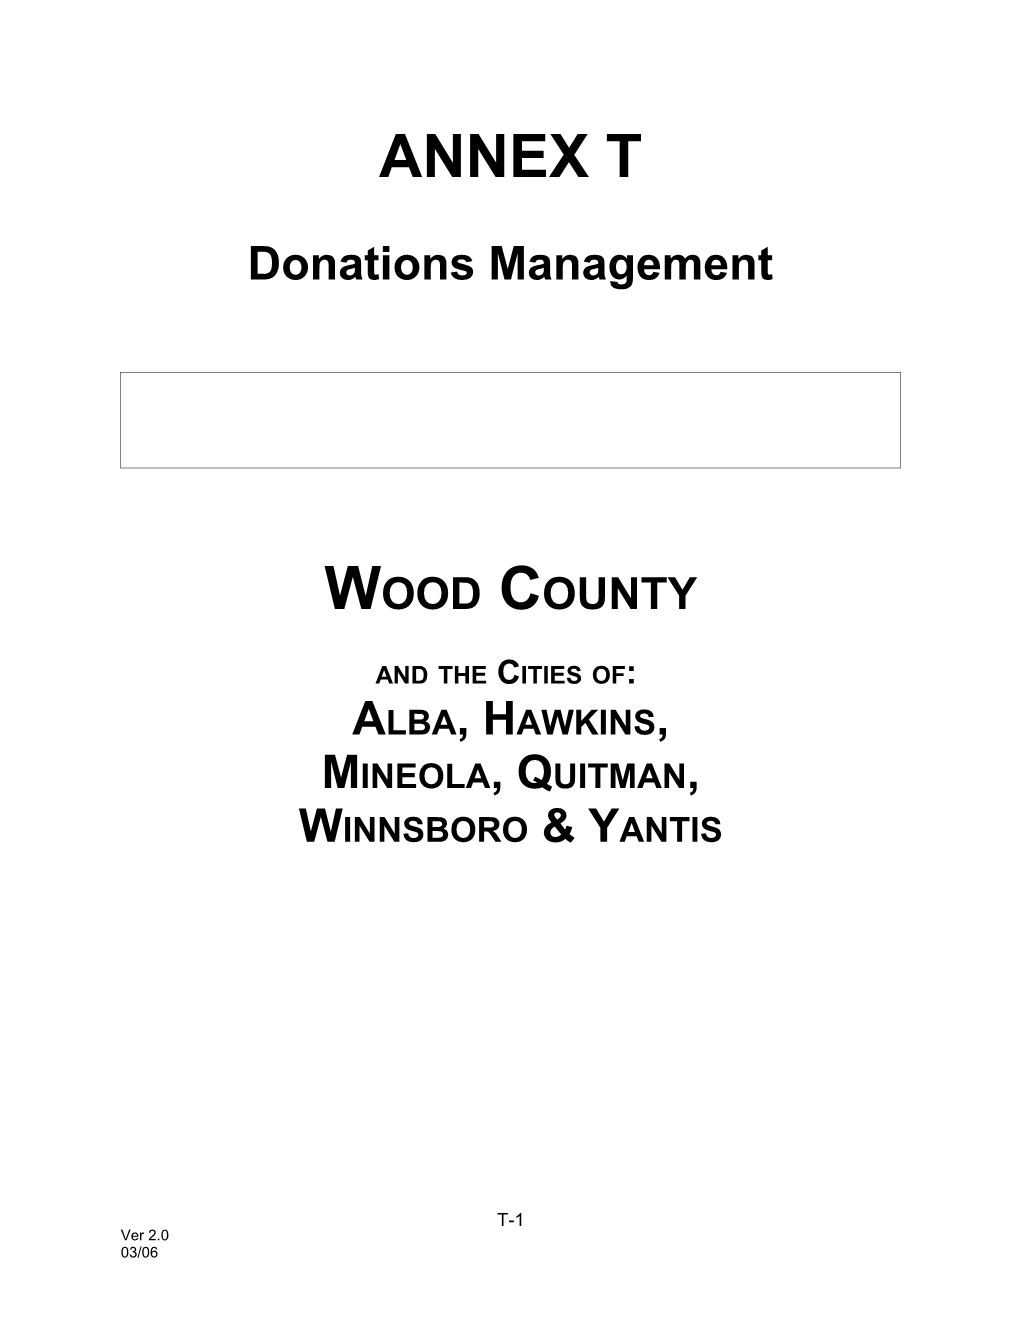 ANNEX T - Donations Mgmt